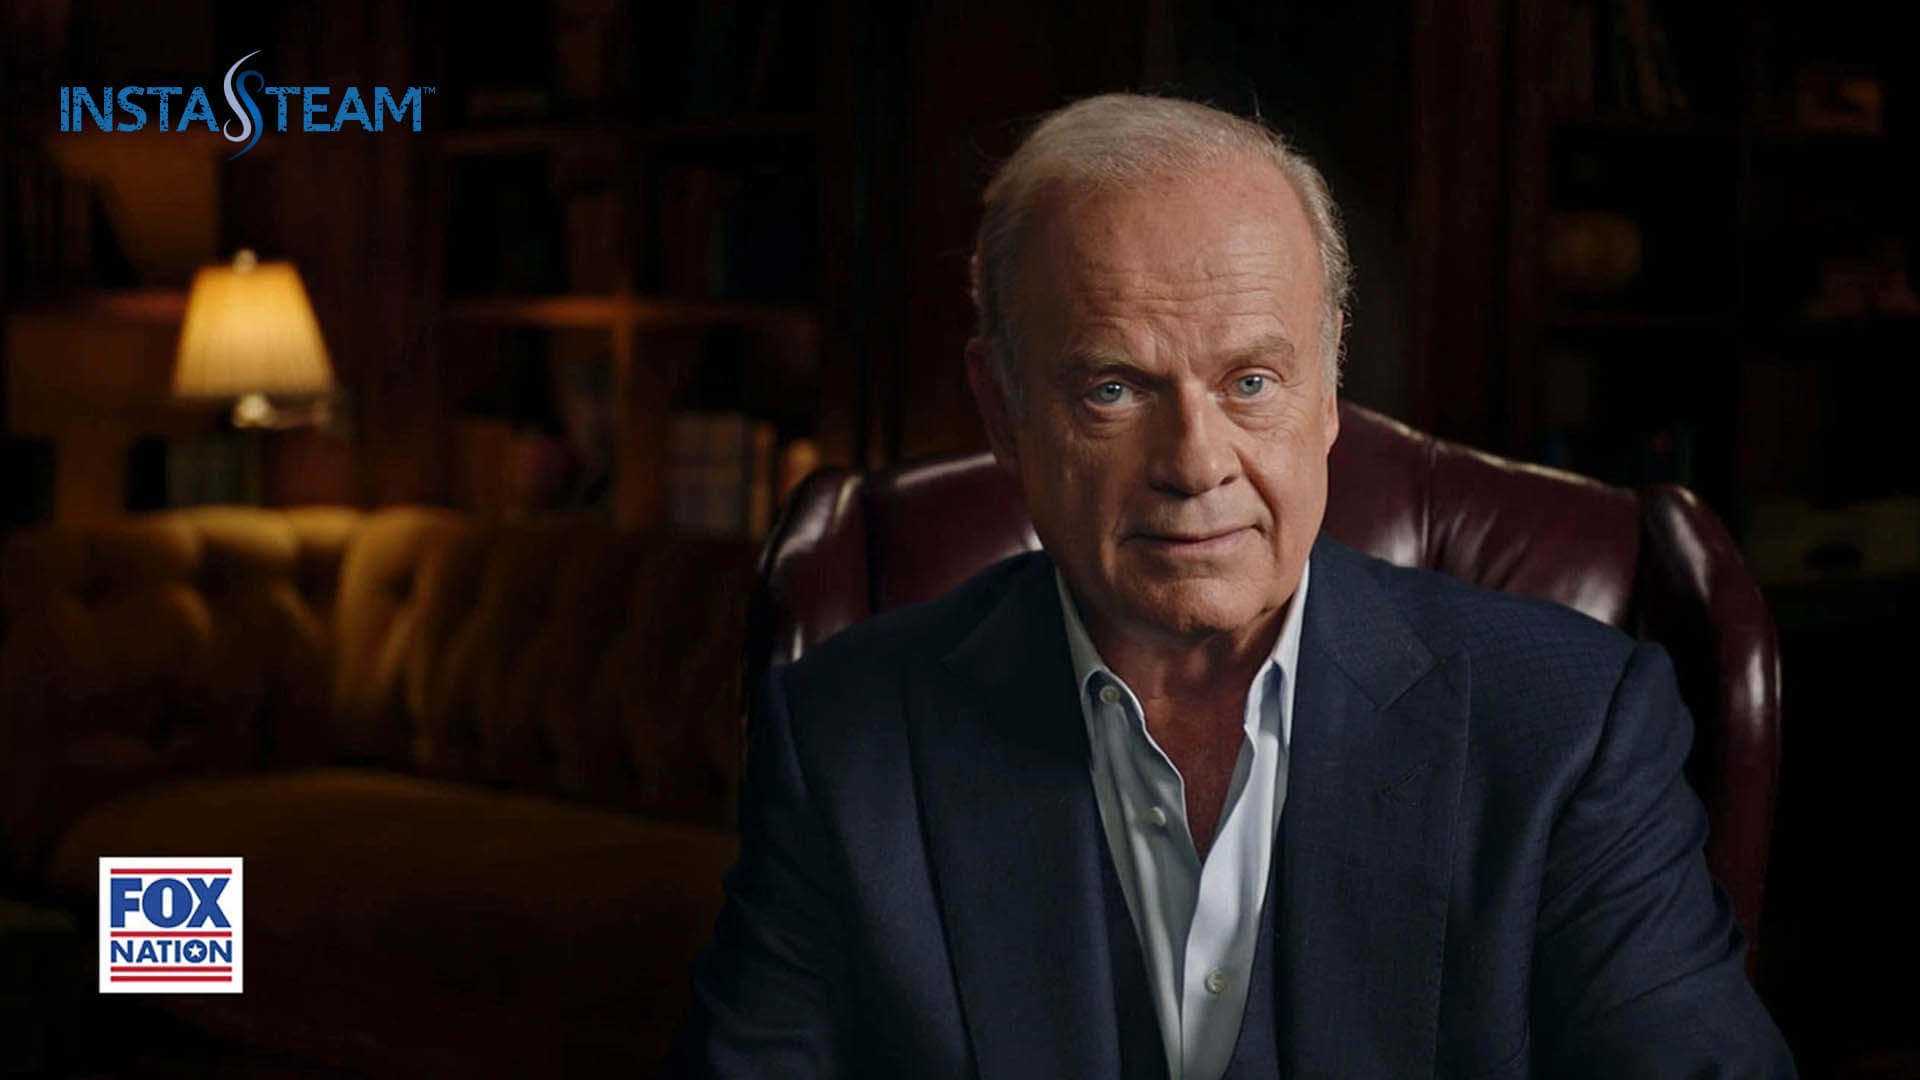 Kelsey Grammer To Host ‘Historic Battles’ Series For Fox Nation Along With ‘Legends & Lies’ Deal – Update